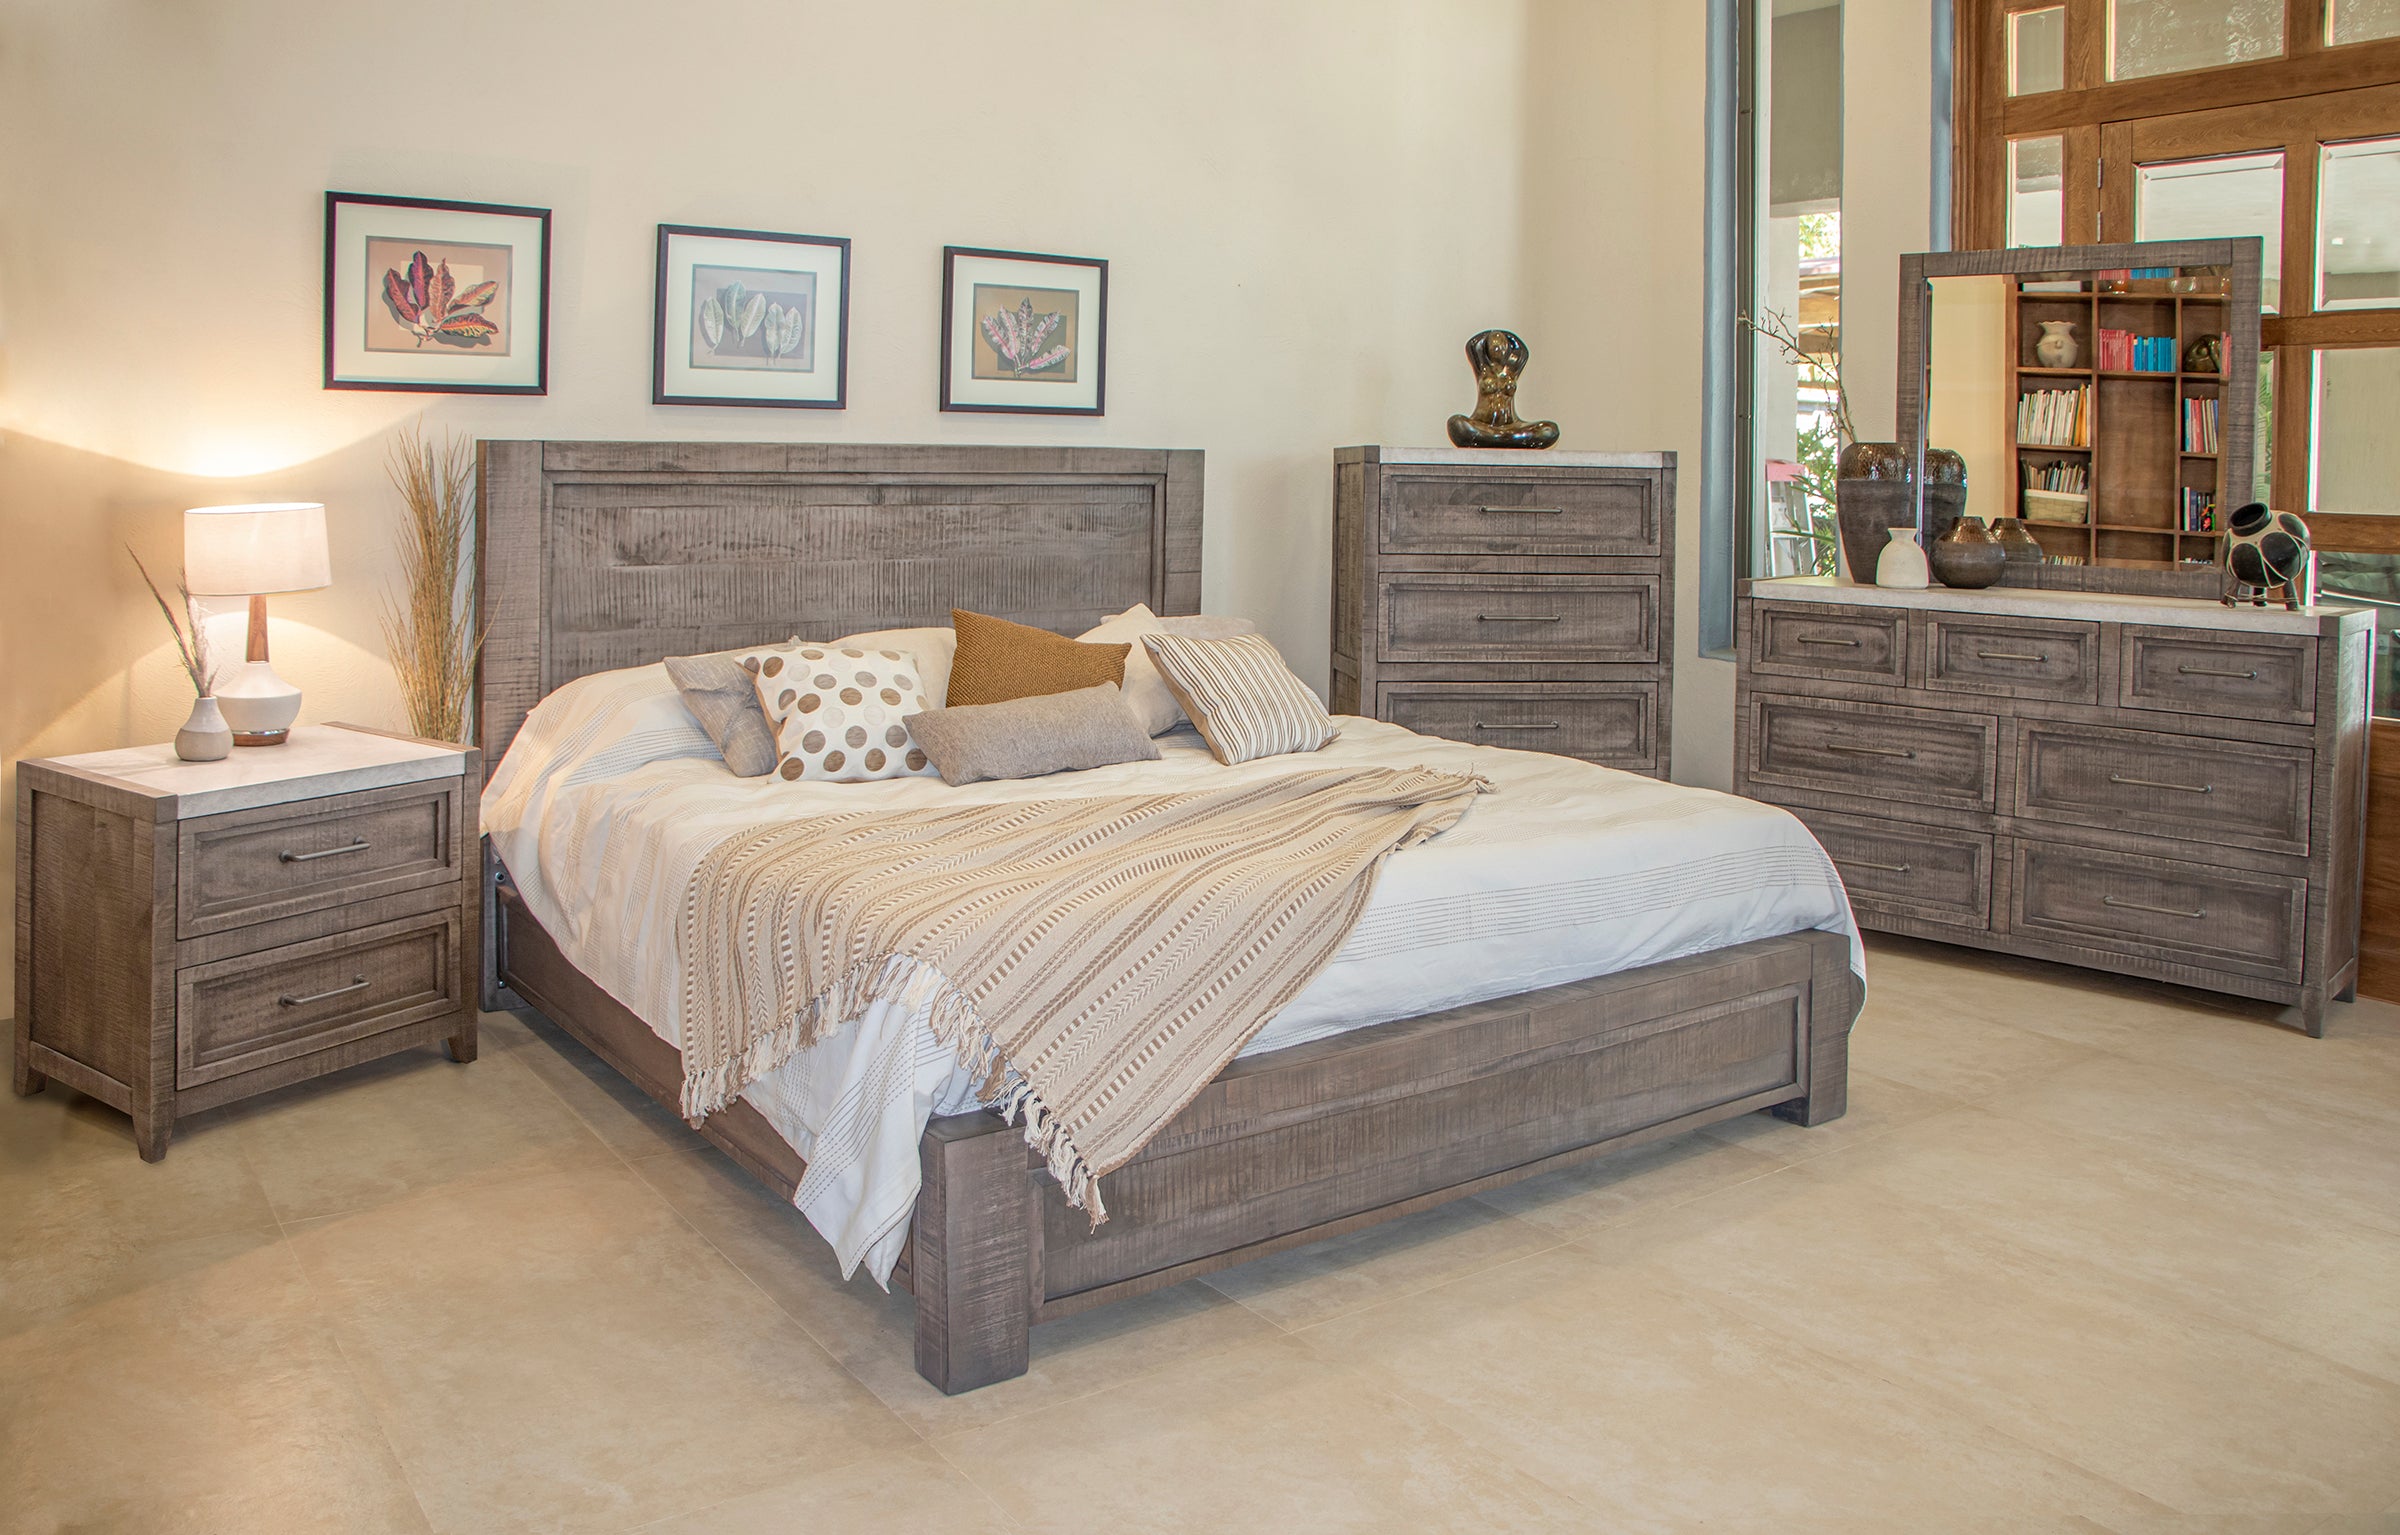 MARBLE BEDROOM COLLECTION Model: IFD6391BEDROOM SOLID WOOD